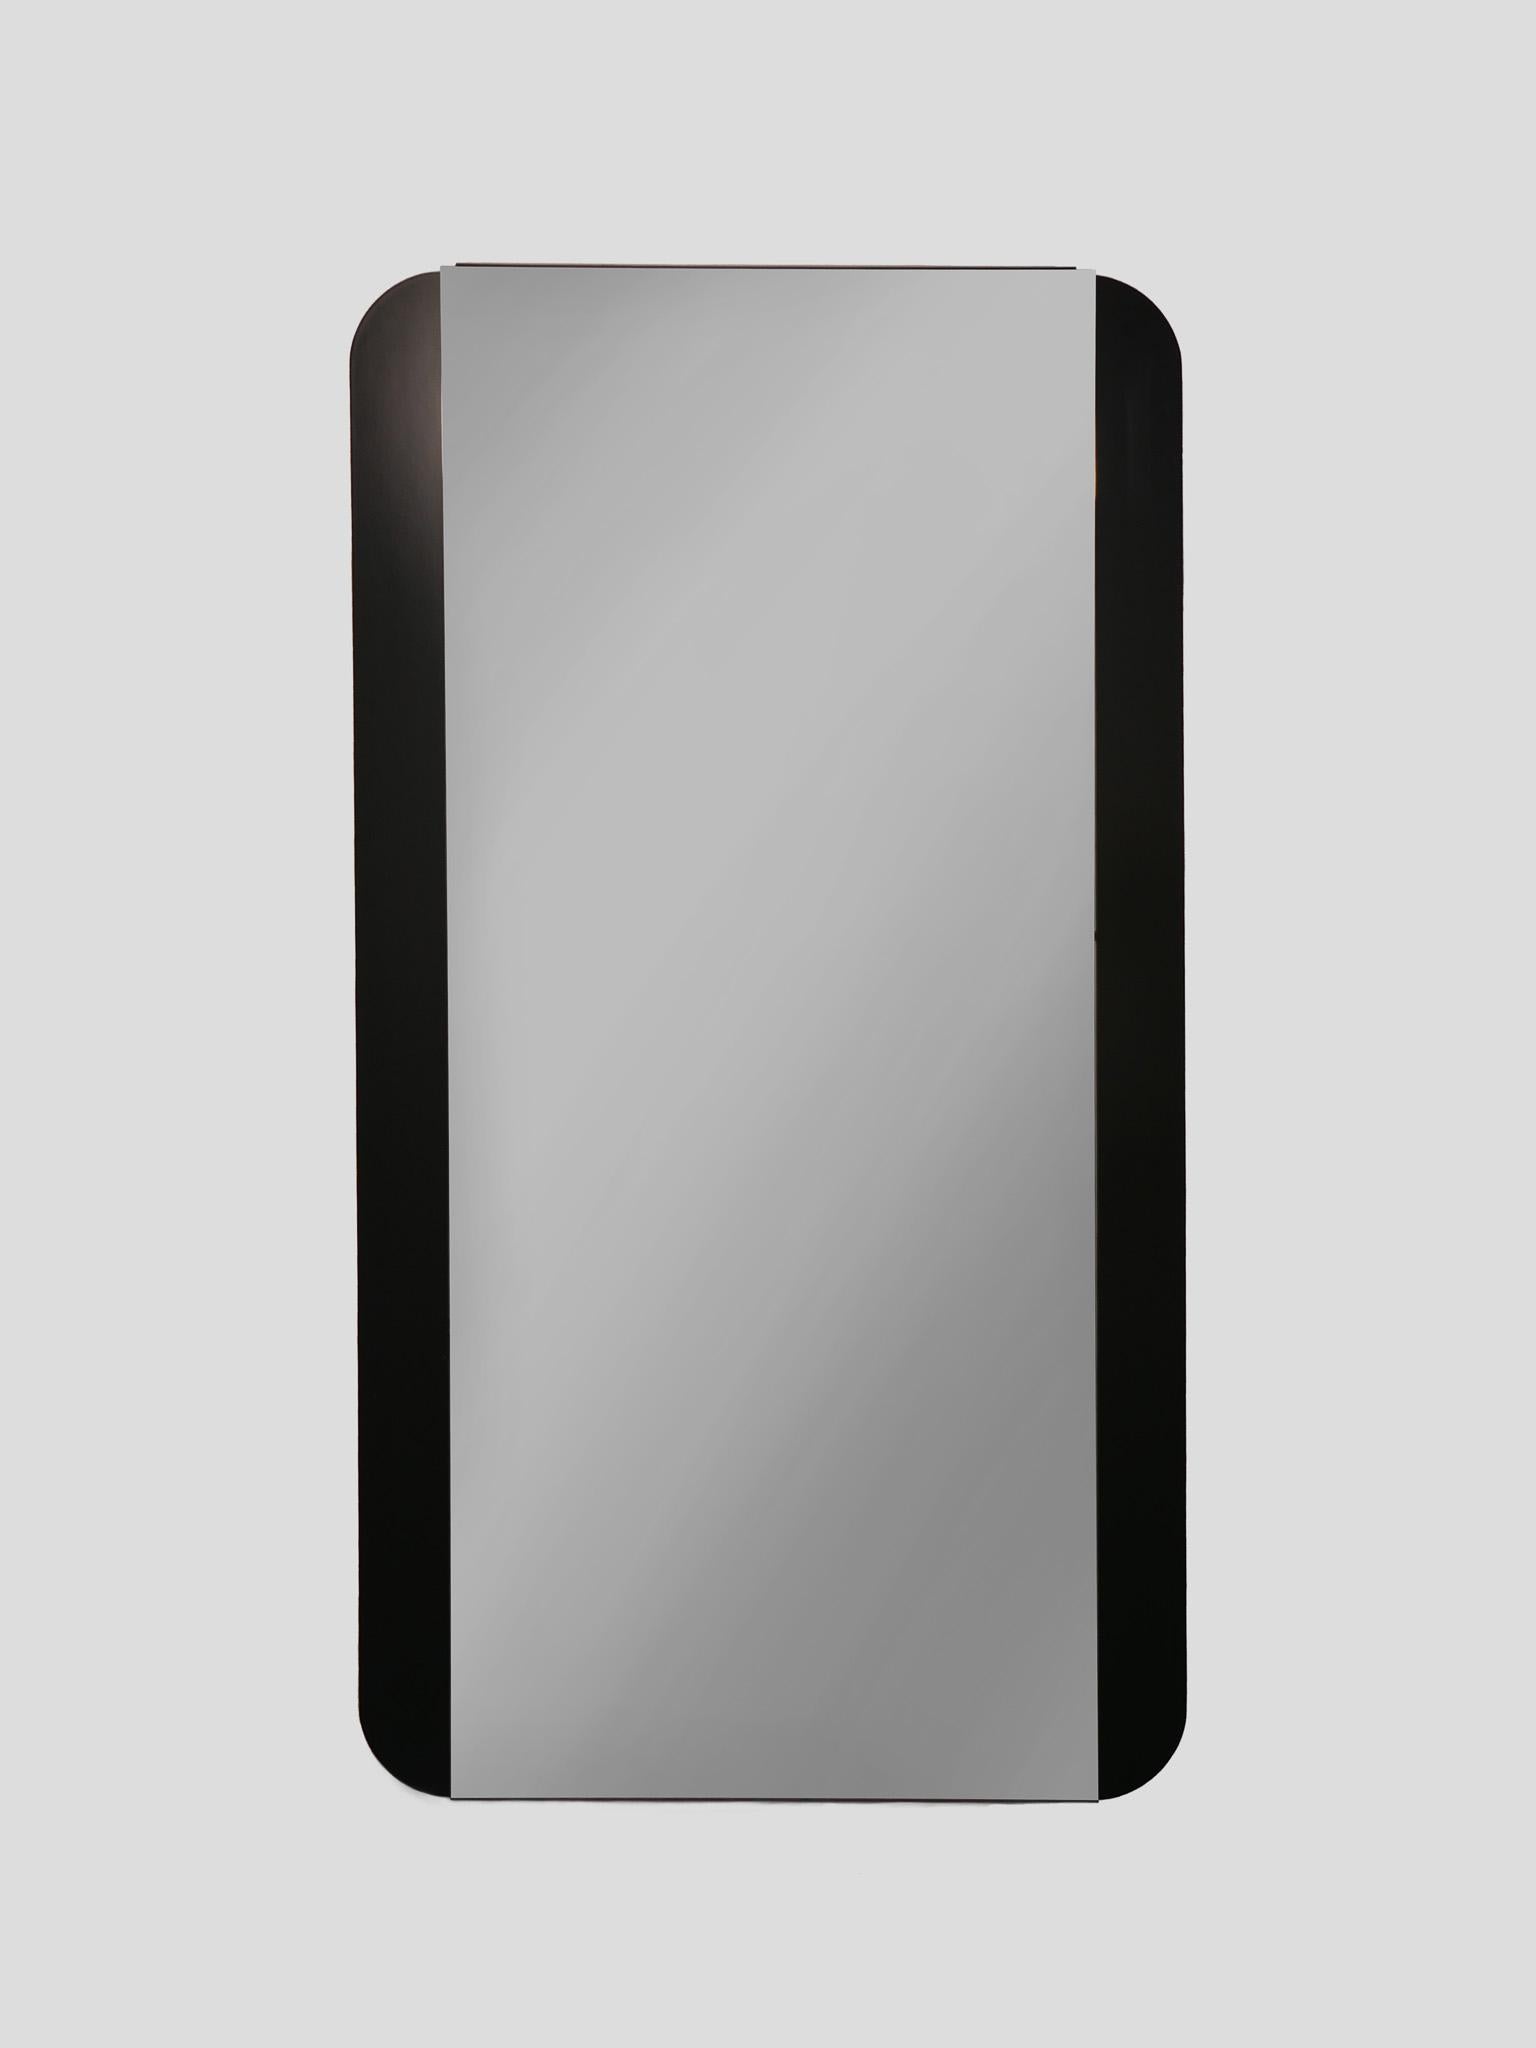 Mid-Century Modern Rectangular Black Smoked Wall Mirror, Italy 1970s

The dark wooden beams, the rounded corners and the narrow mirror surface make this beautiful mid-century modern mirror a true eye-catcher. The mirror can be used as a wardrobe